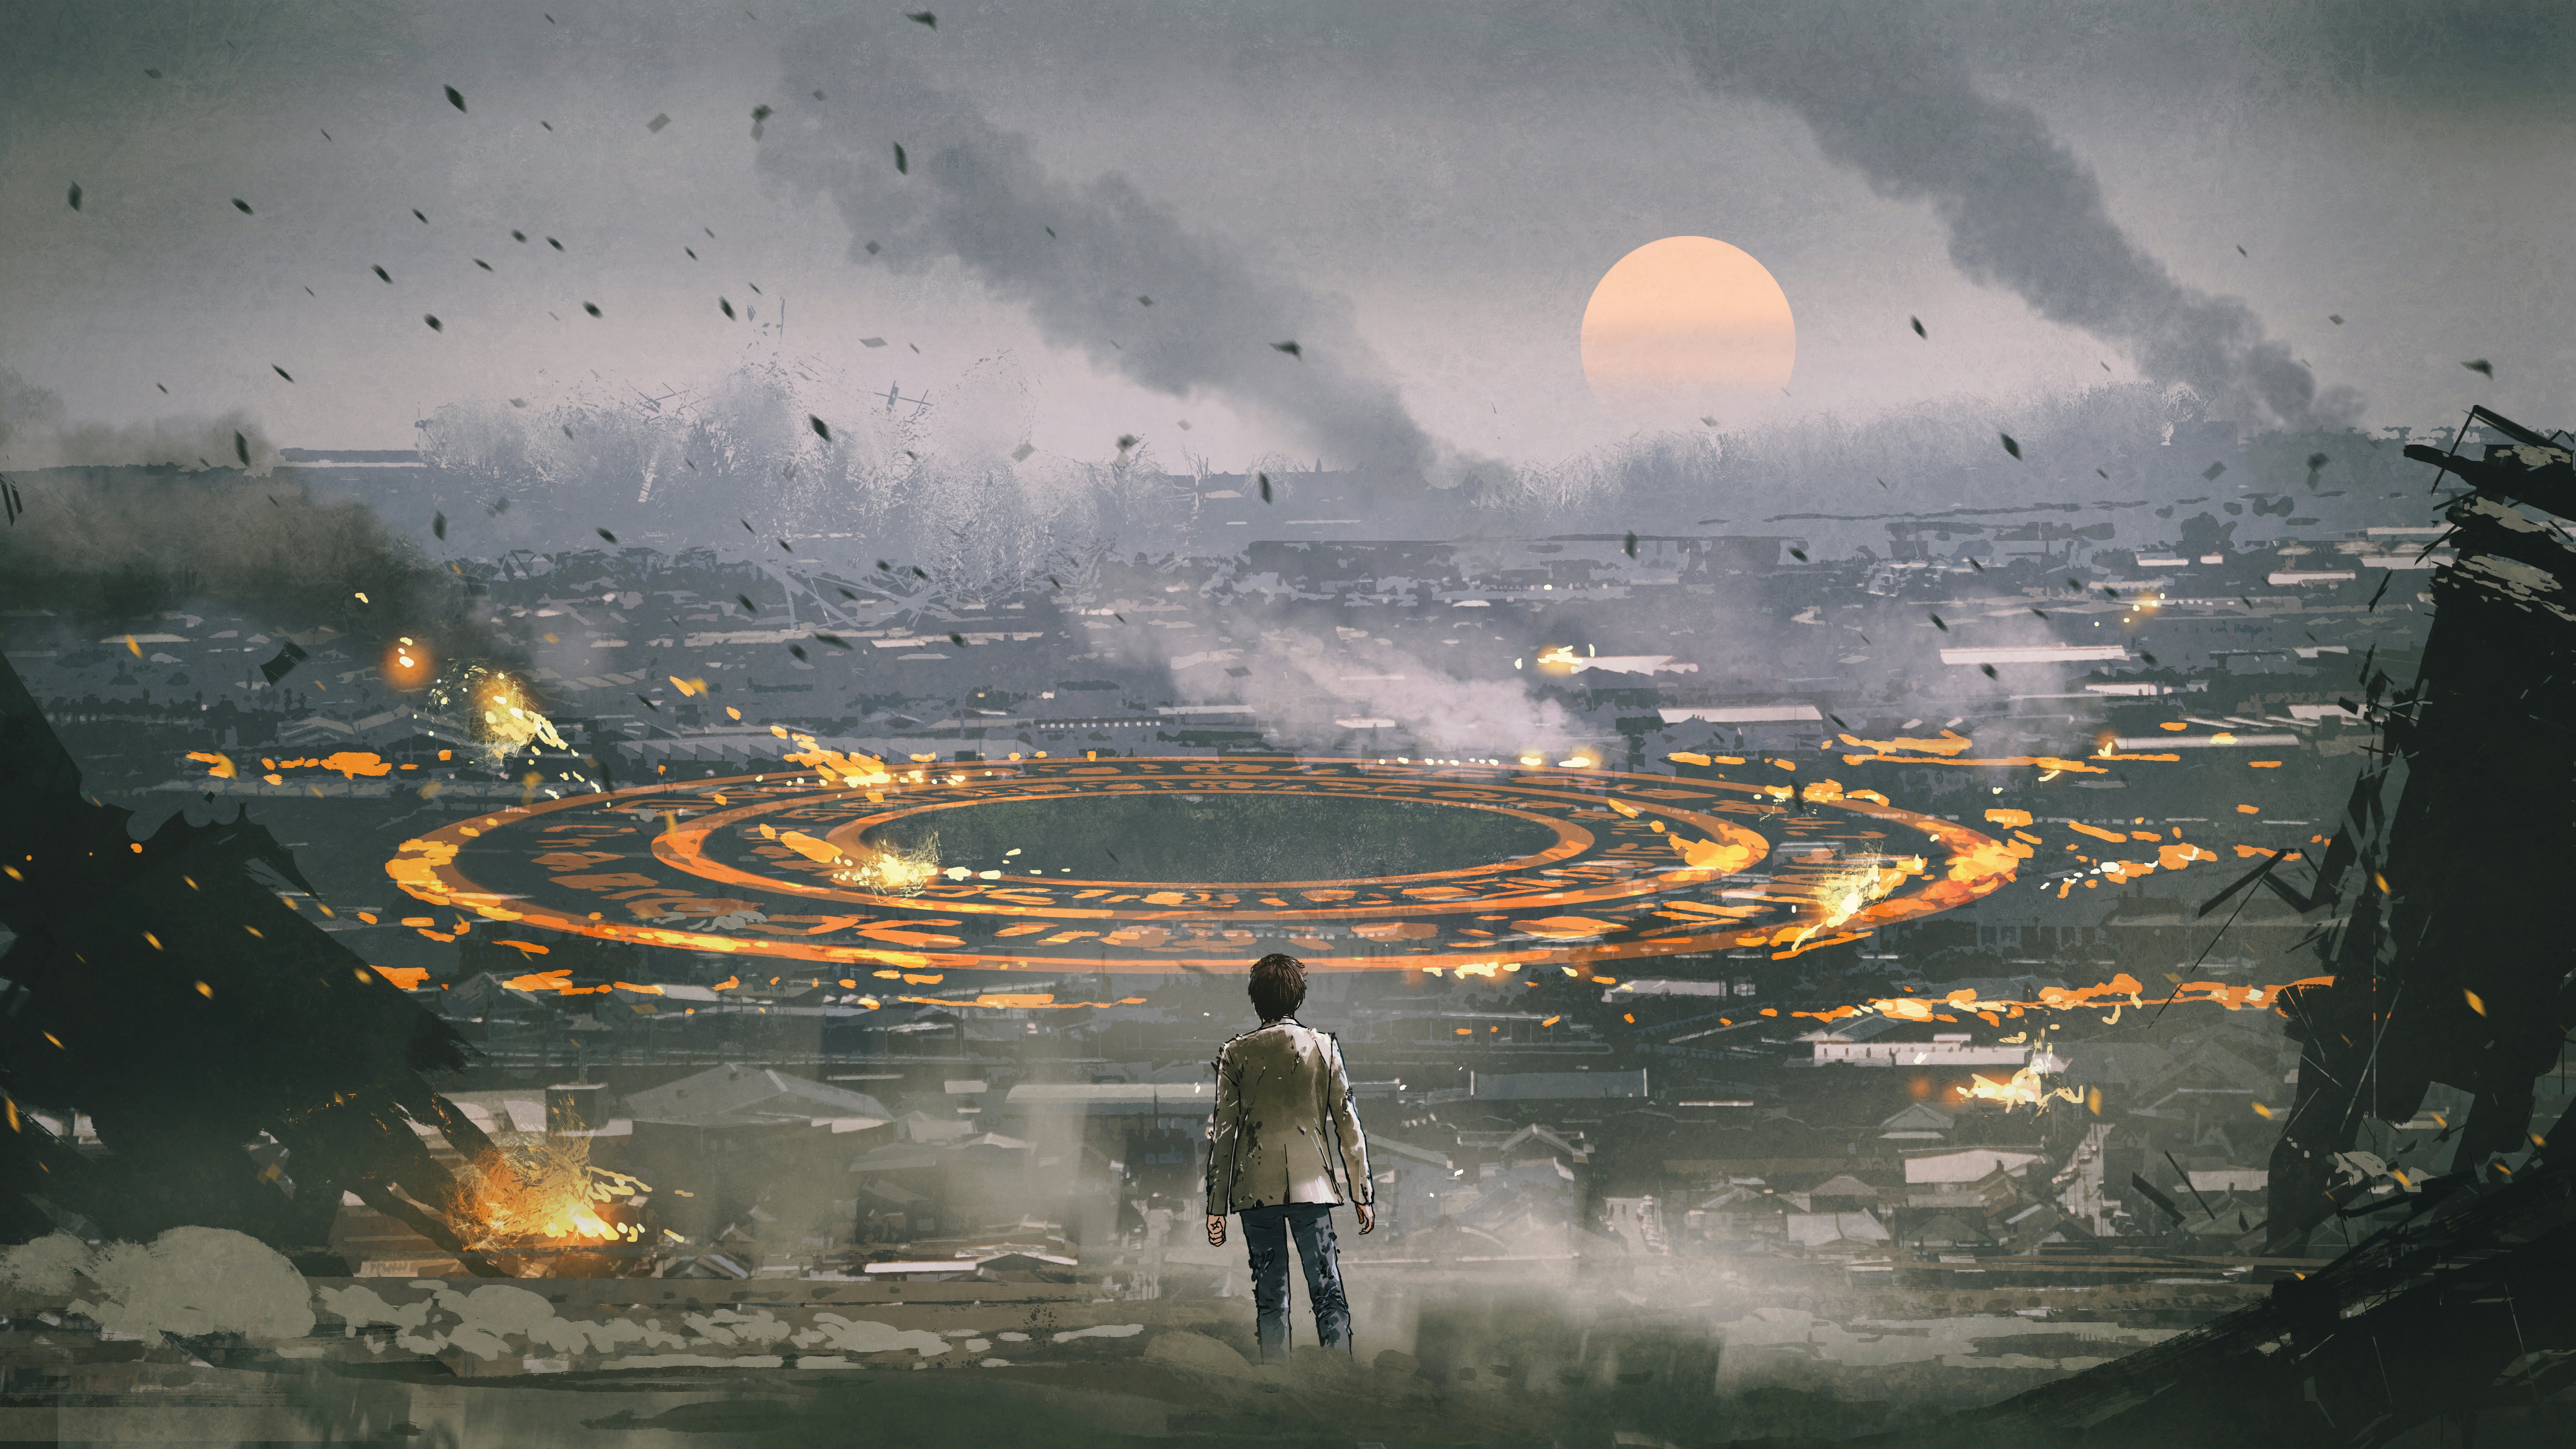 The Maze Runner': Eerie concept art revealed for YA movie adaptation